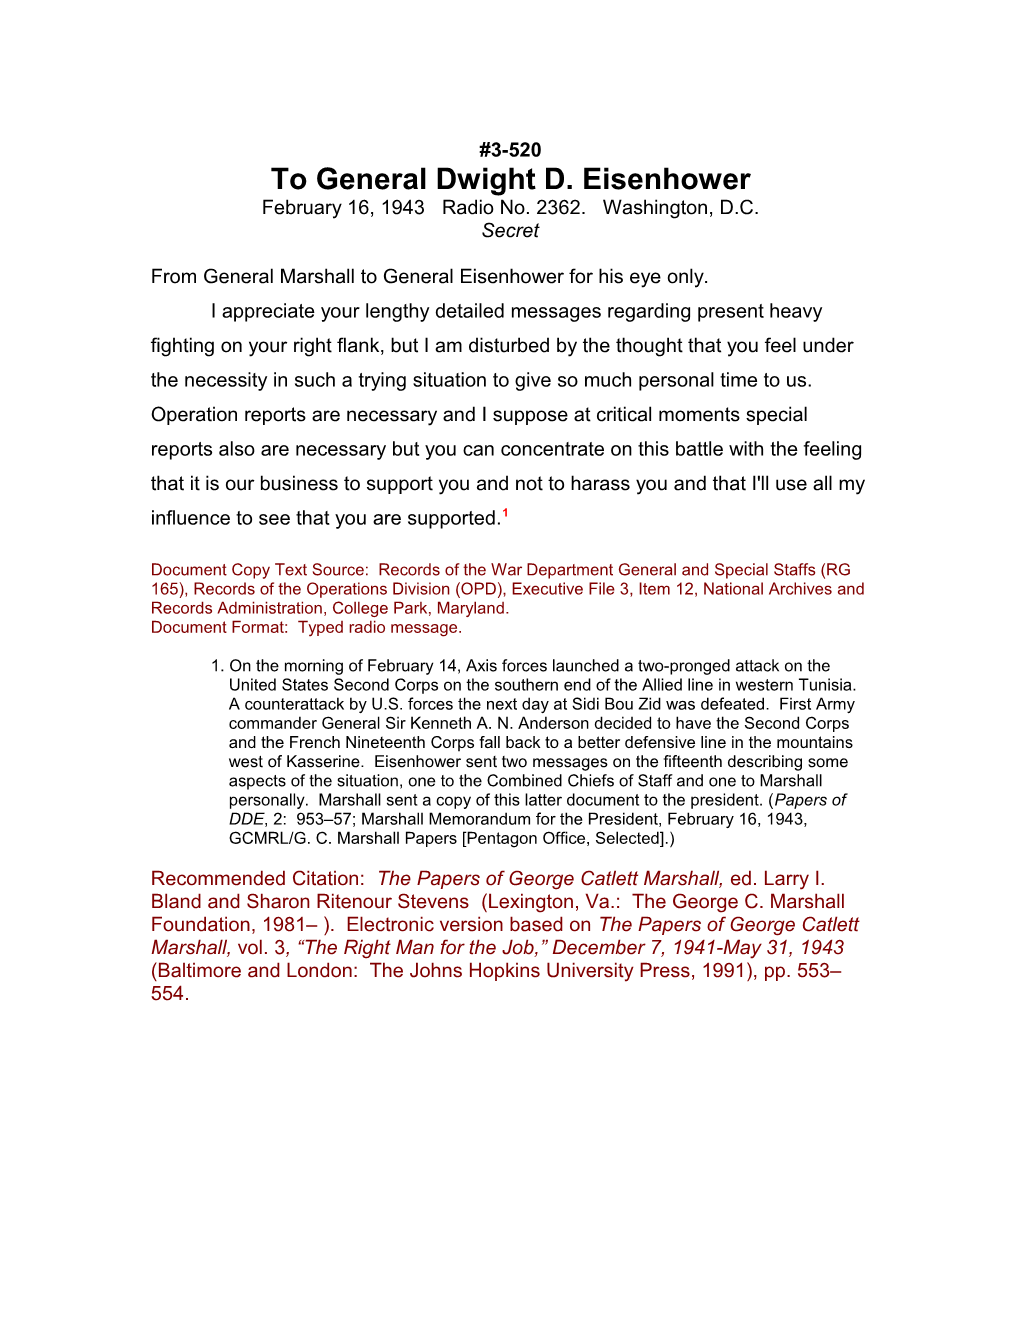 To General Dwight D. Eisenhower s2